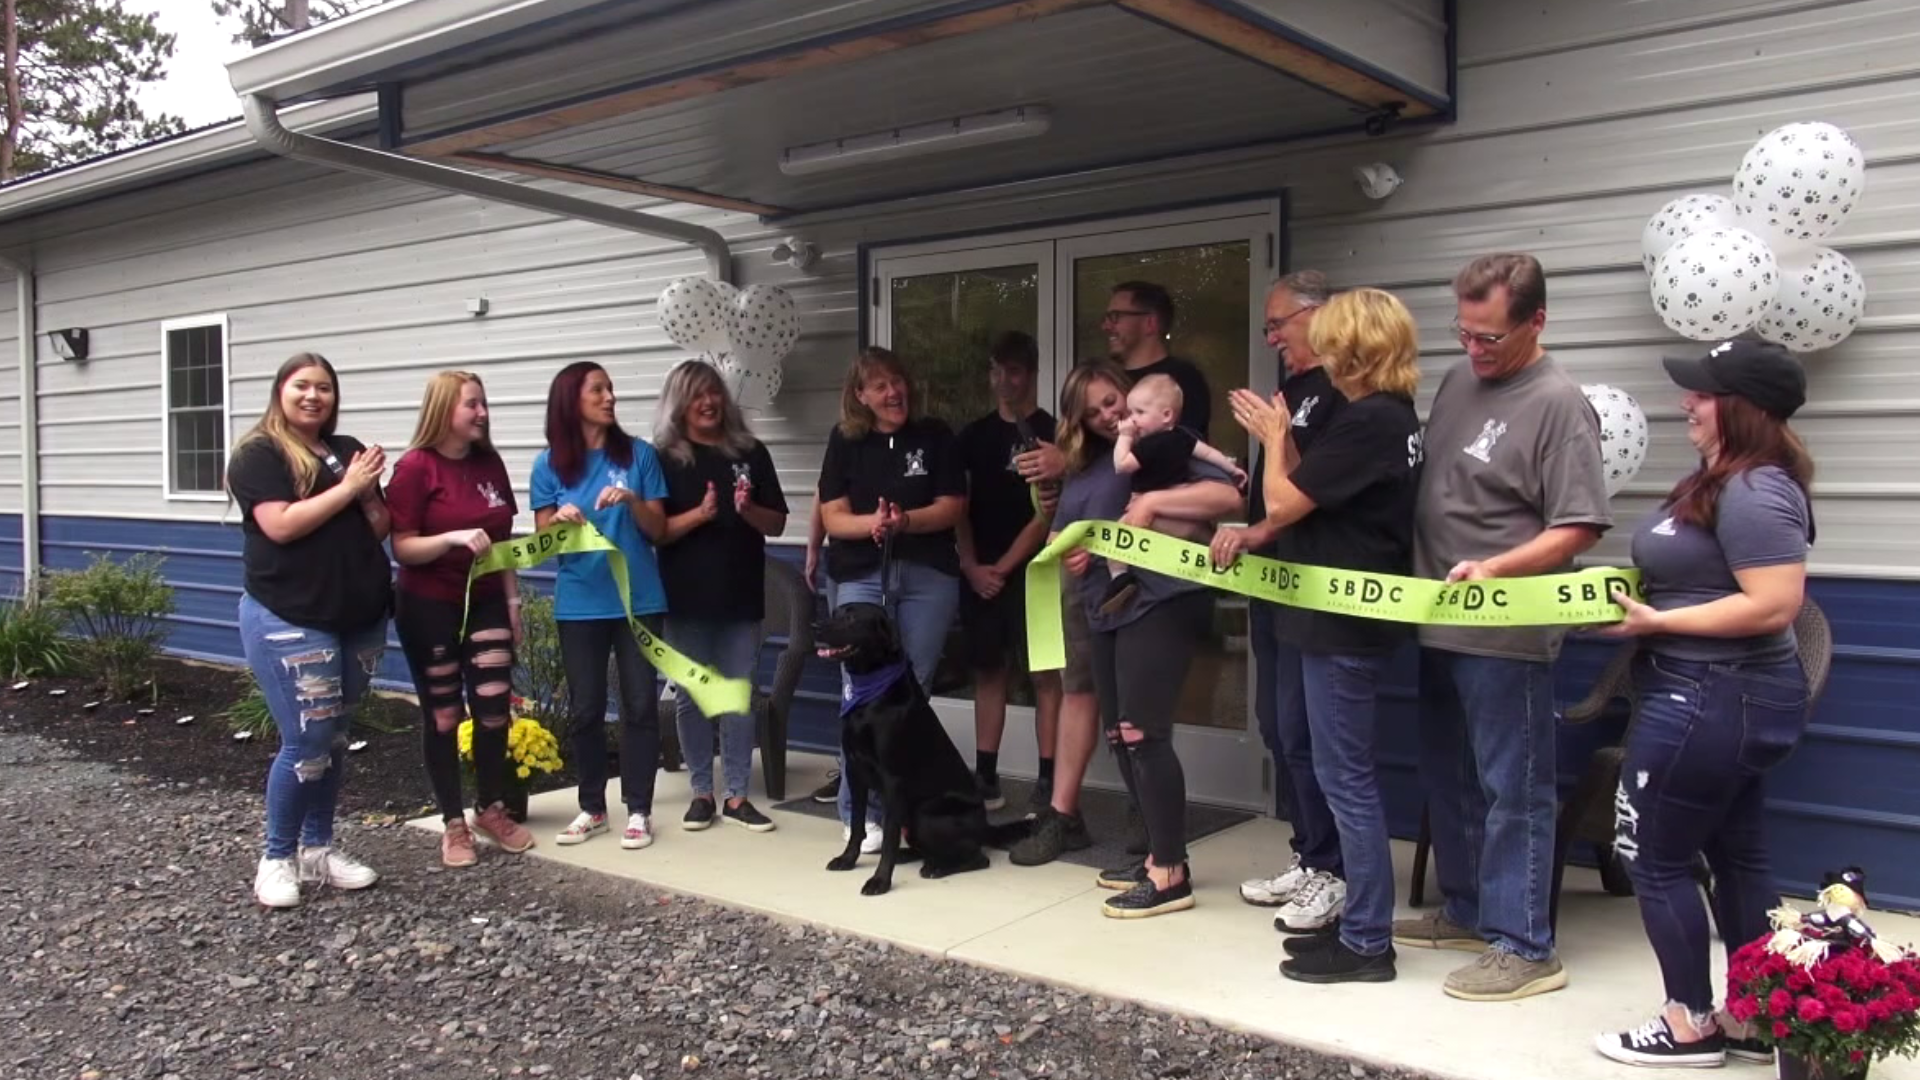 Paw Pack Doggy Daycare celebrated its grand opening with a ribbon-cutting on Friday afternoon.